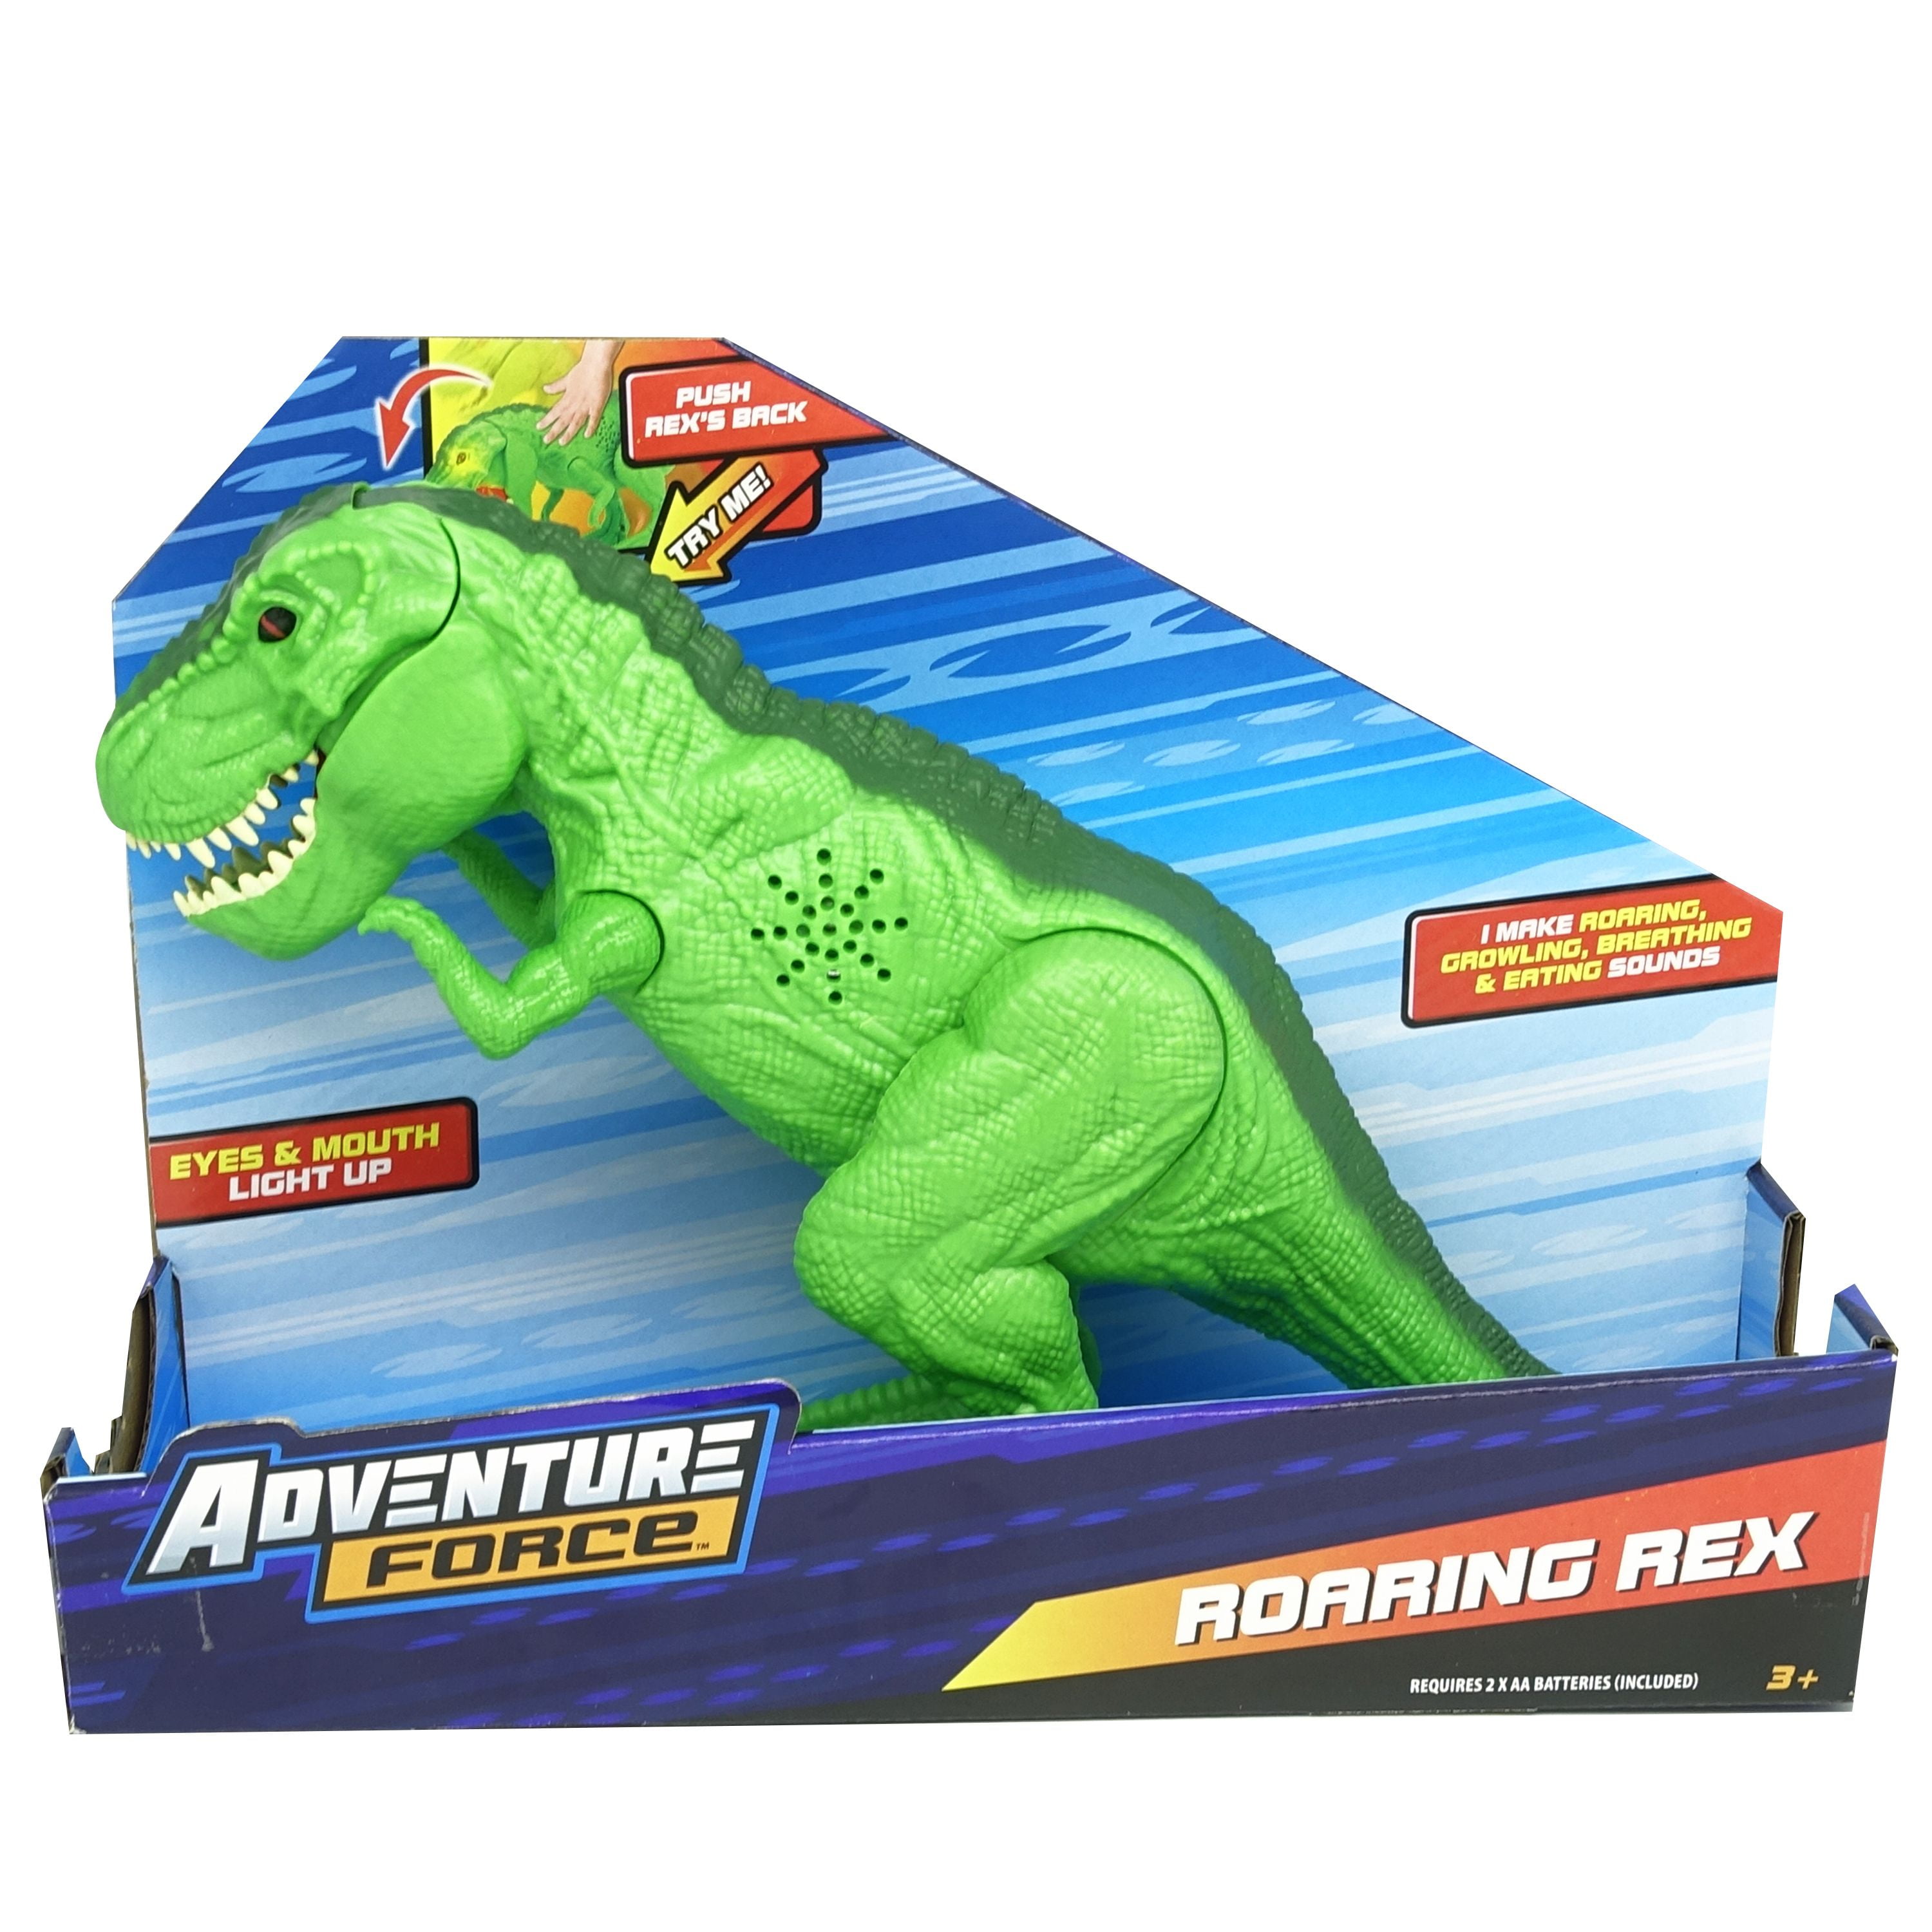 3 Years One Supplied Roaring Dinosaur Figures Assorted Children's Toy 